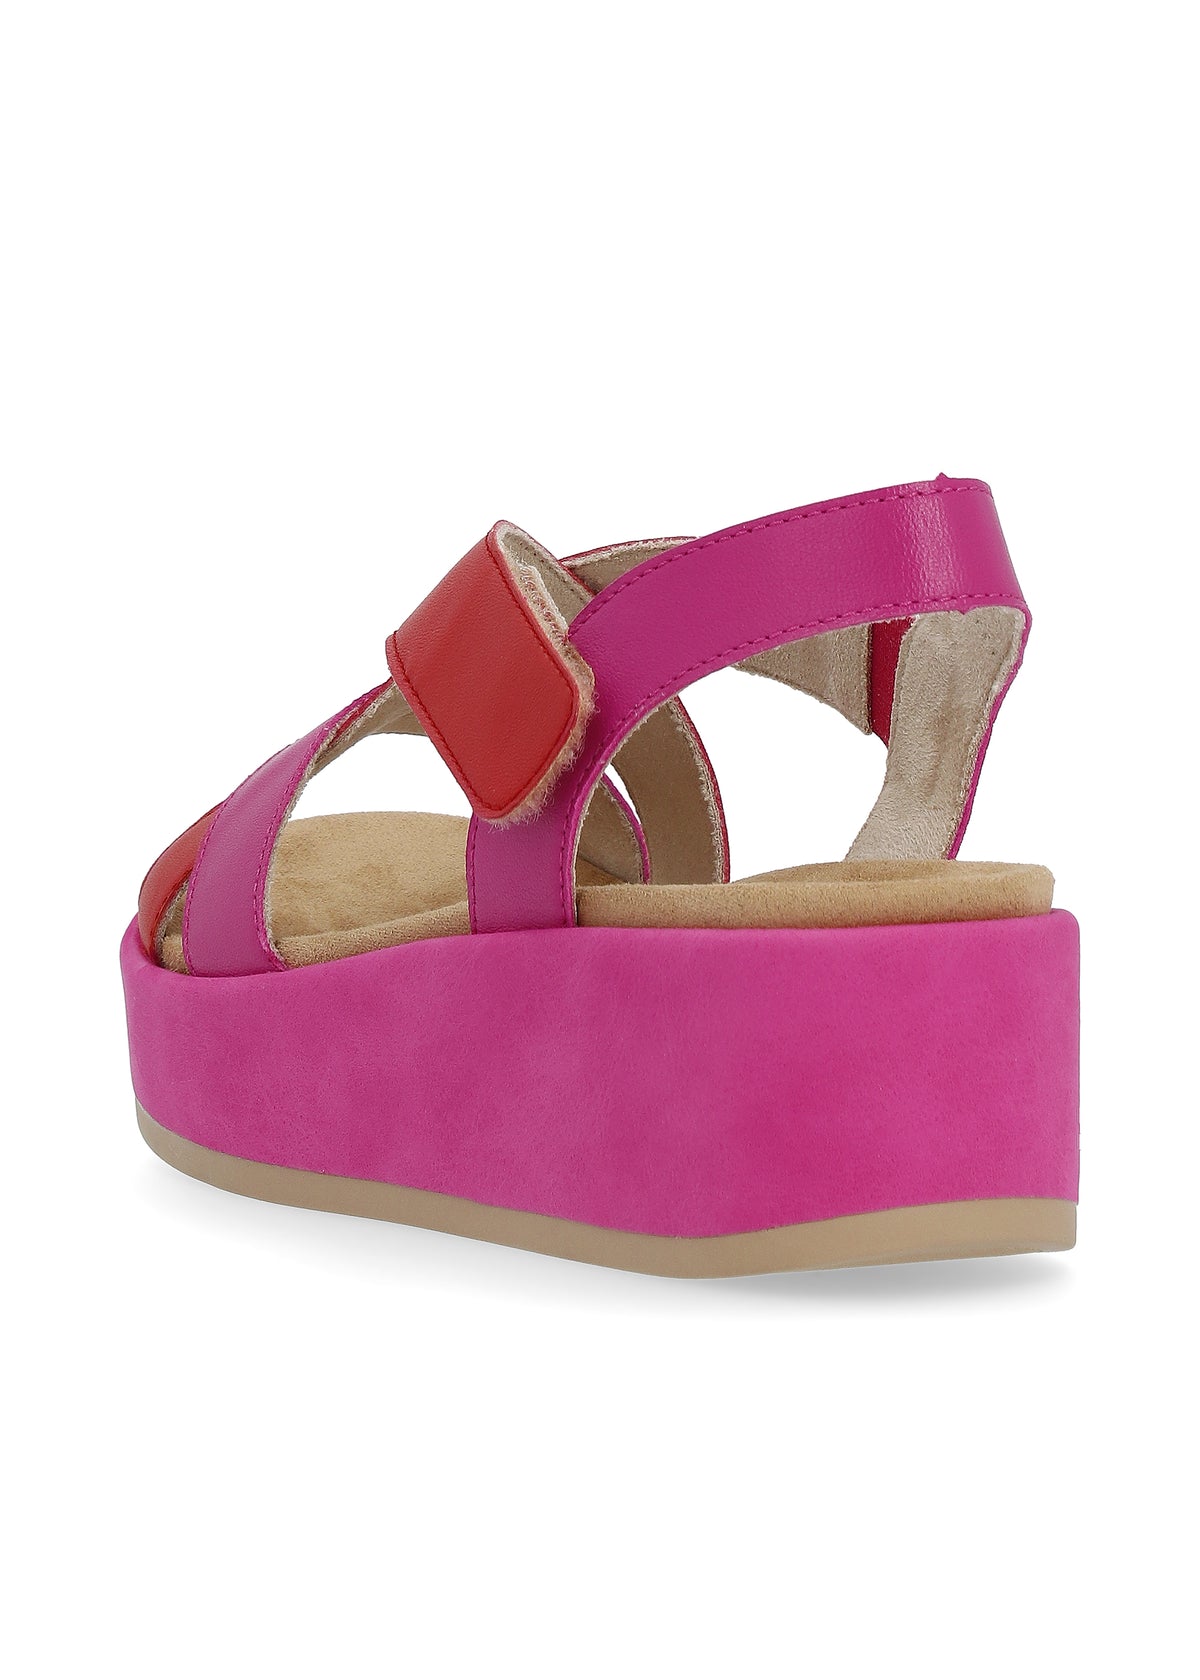 Sandals with a thick sole - pink, red, Velcro fastening